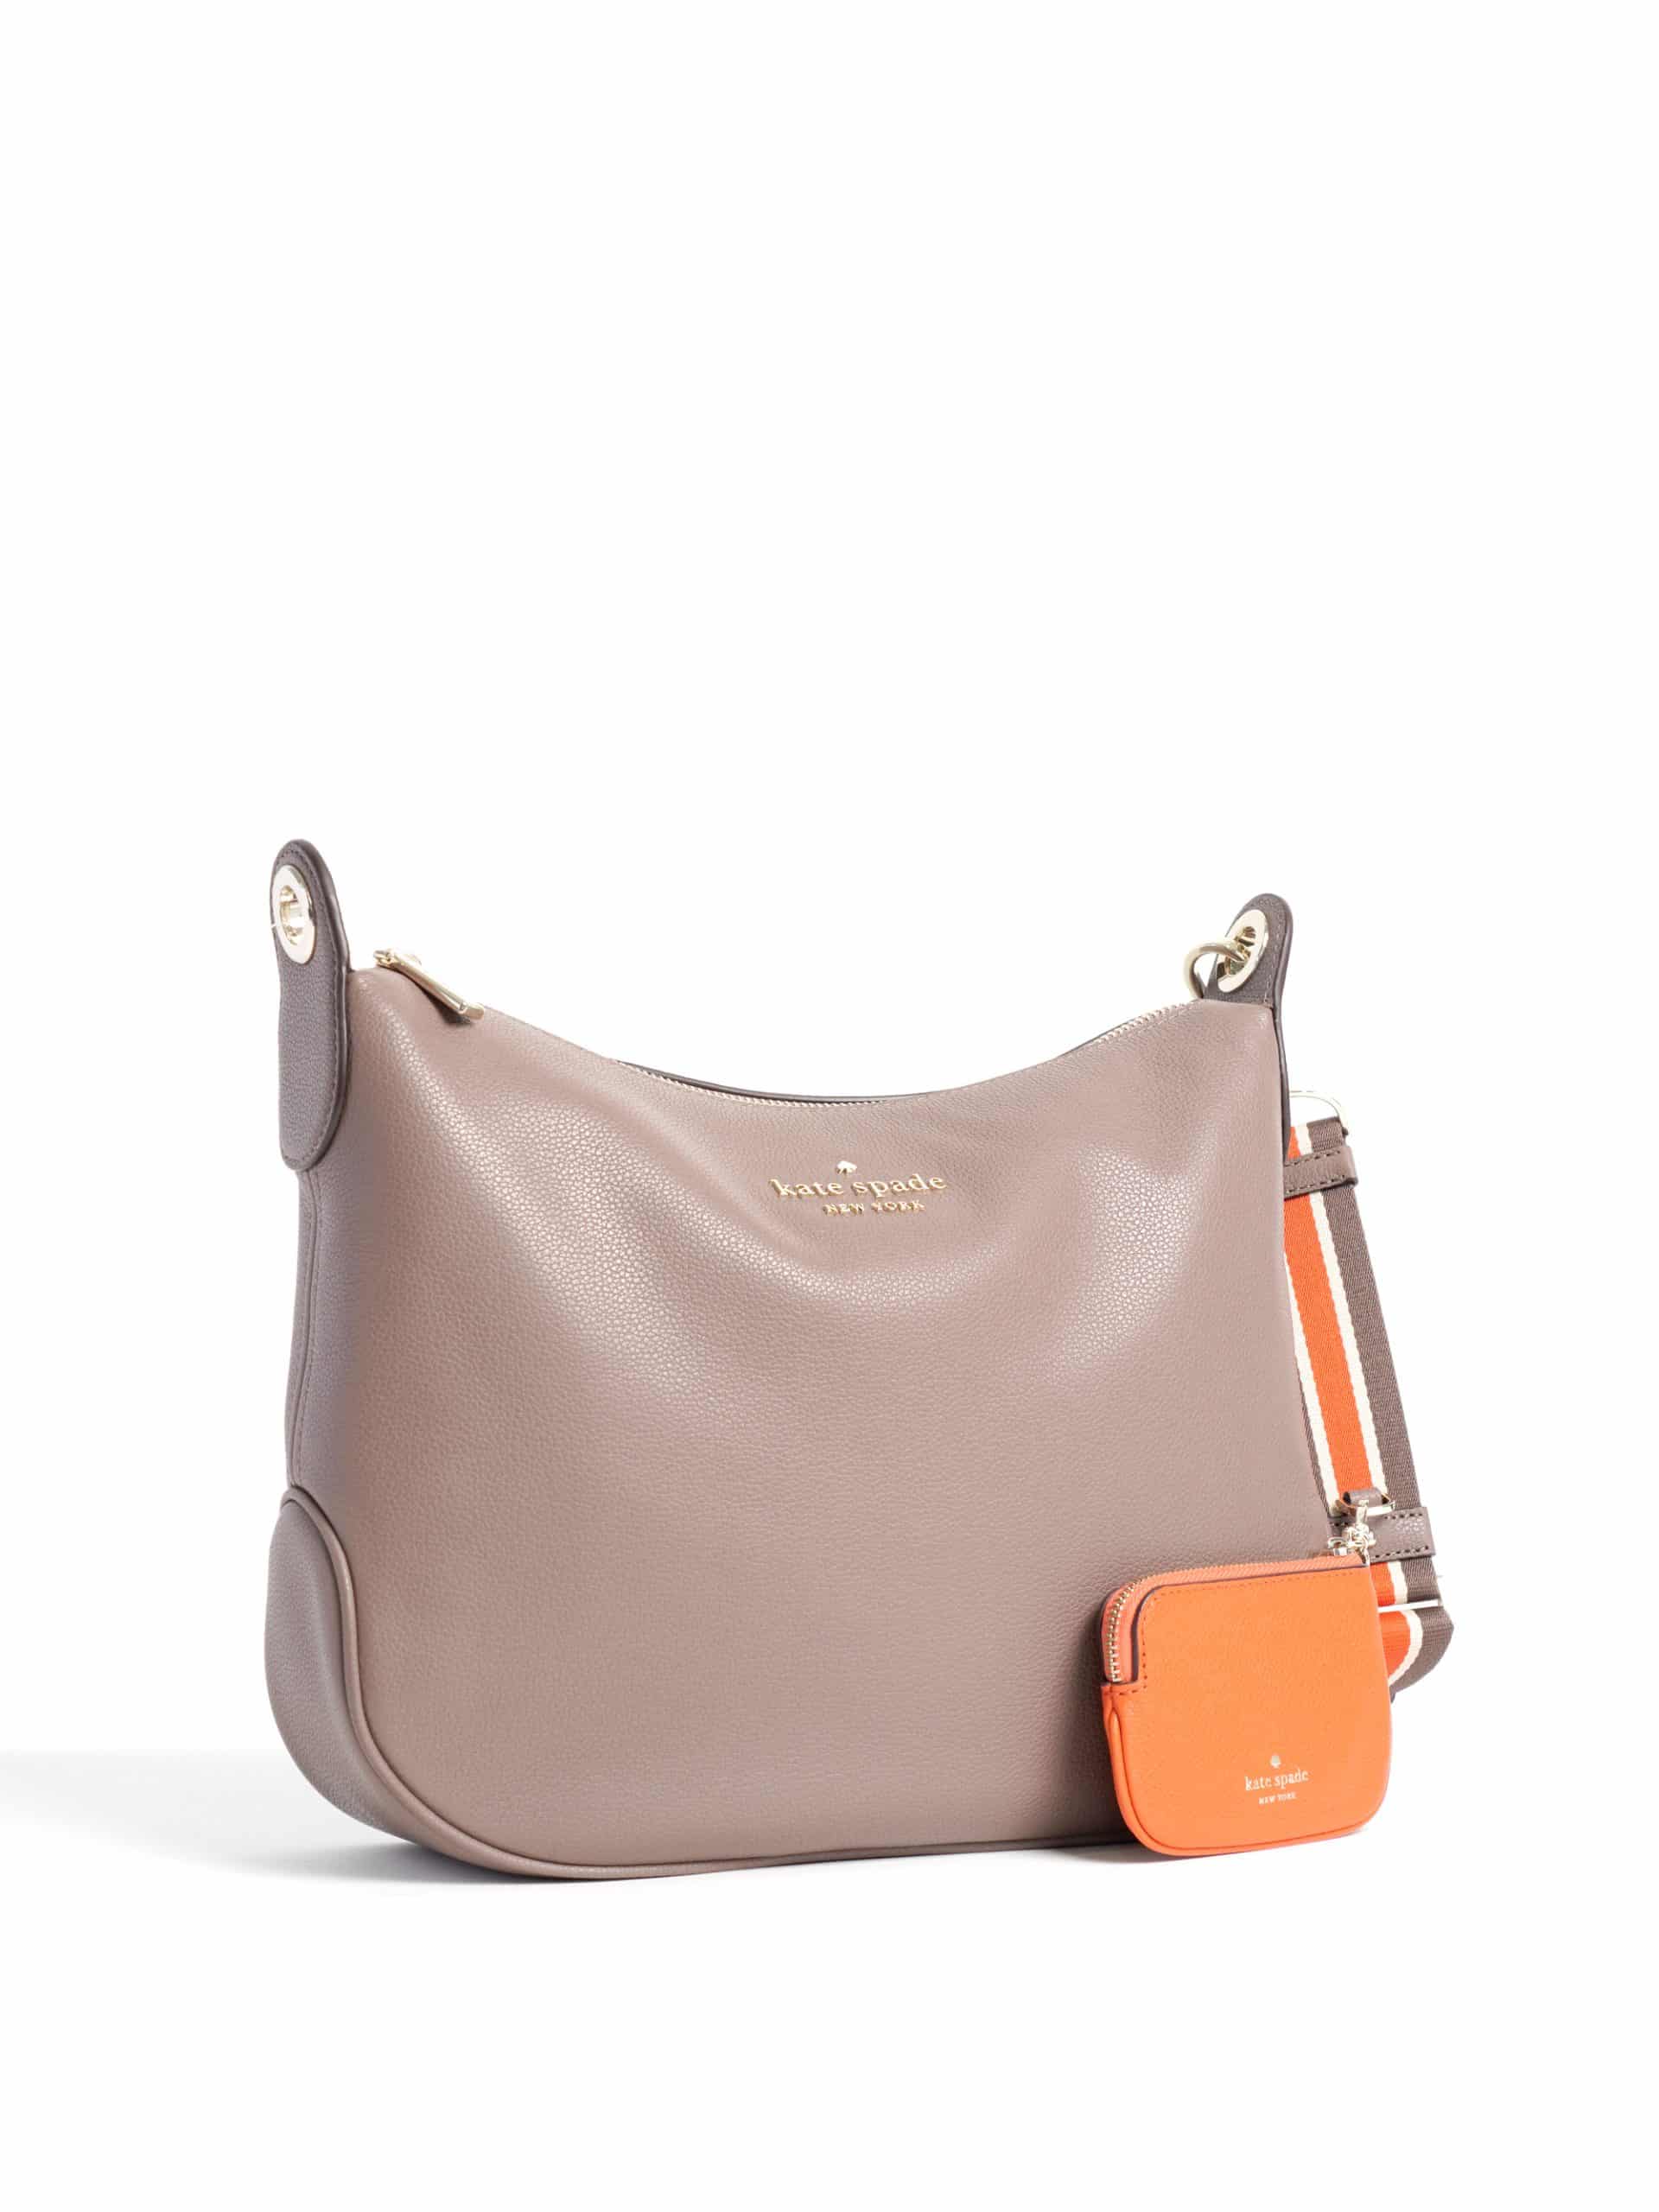 THE BAG REVIEW: KATE SPADE ROSIE CROSSBODY IN GERANIUM AND DUSK CITY SCAPE  